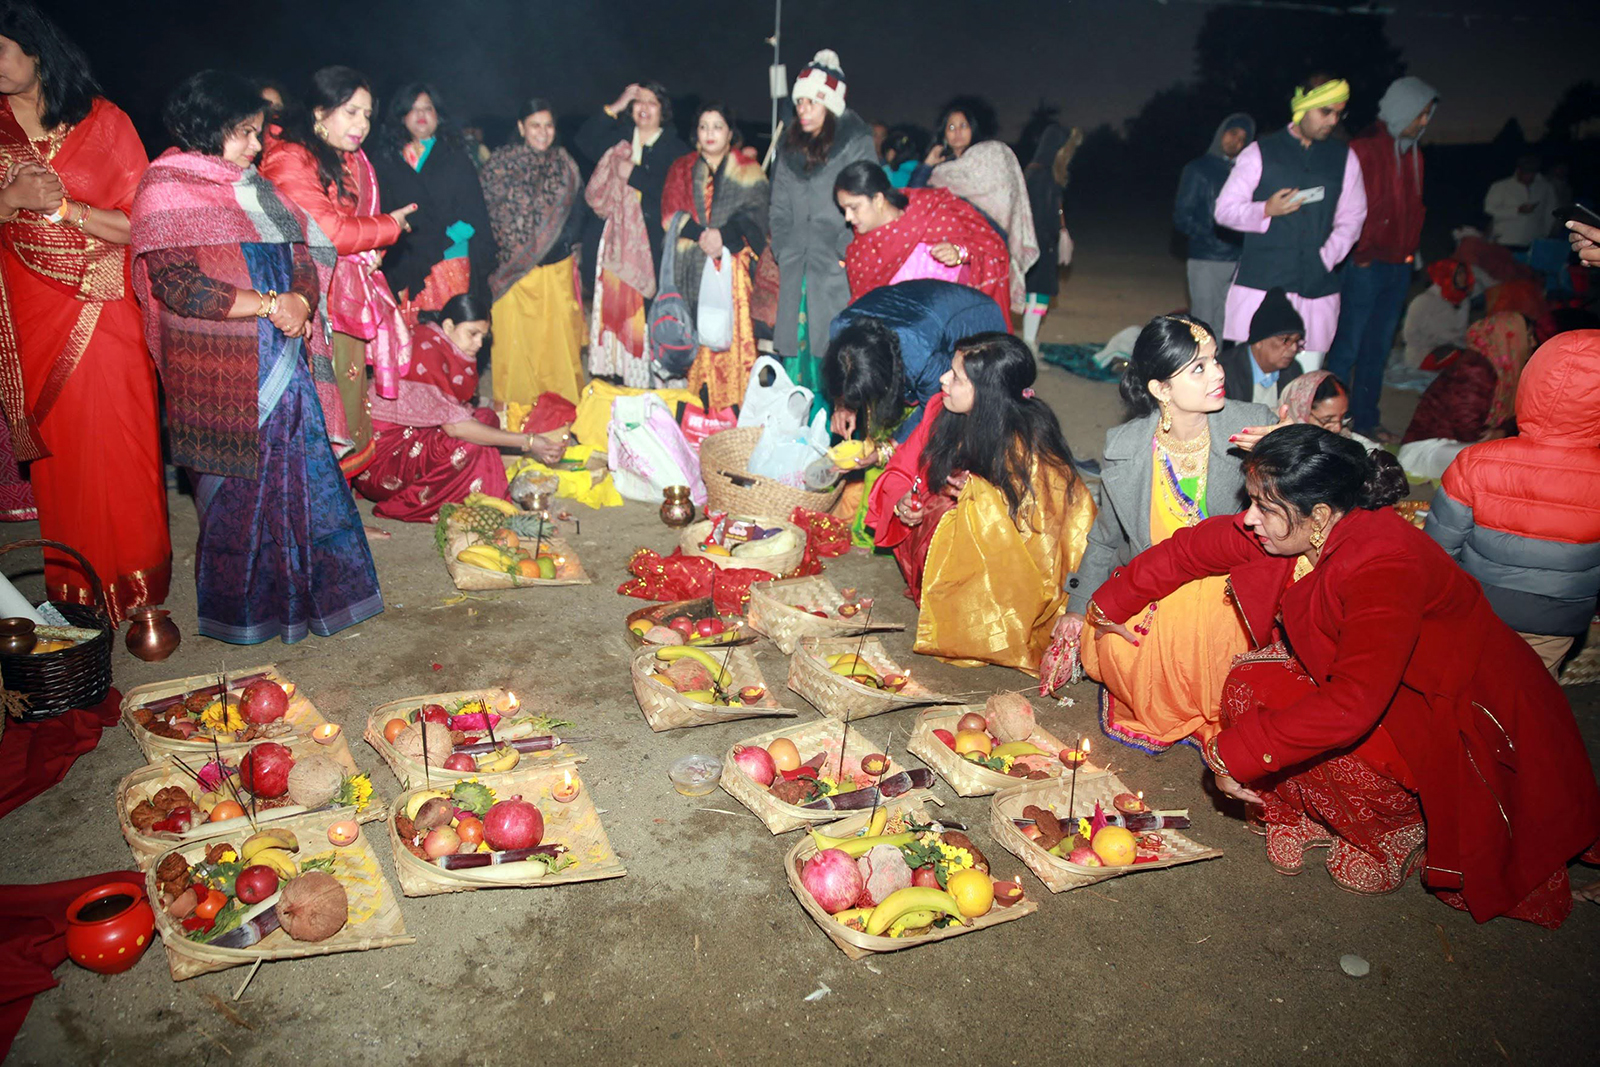 Hindus prepare Chhath puja offerings at Quarry Lakes Regional Recreation Area in Fremont, California, in Nov. 2019. (Photo courtesy Sunil and Shalini Singh)